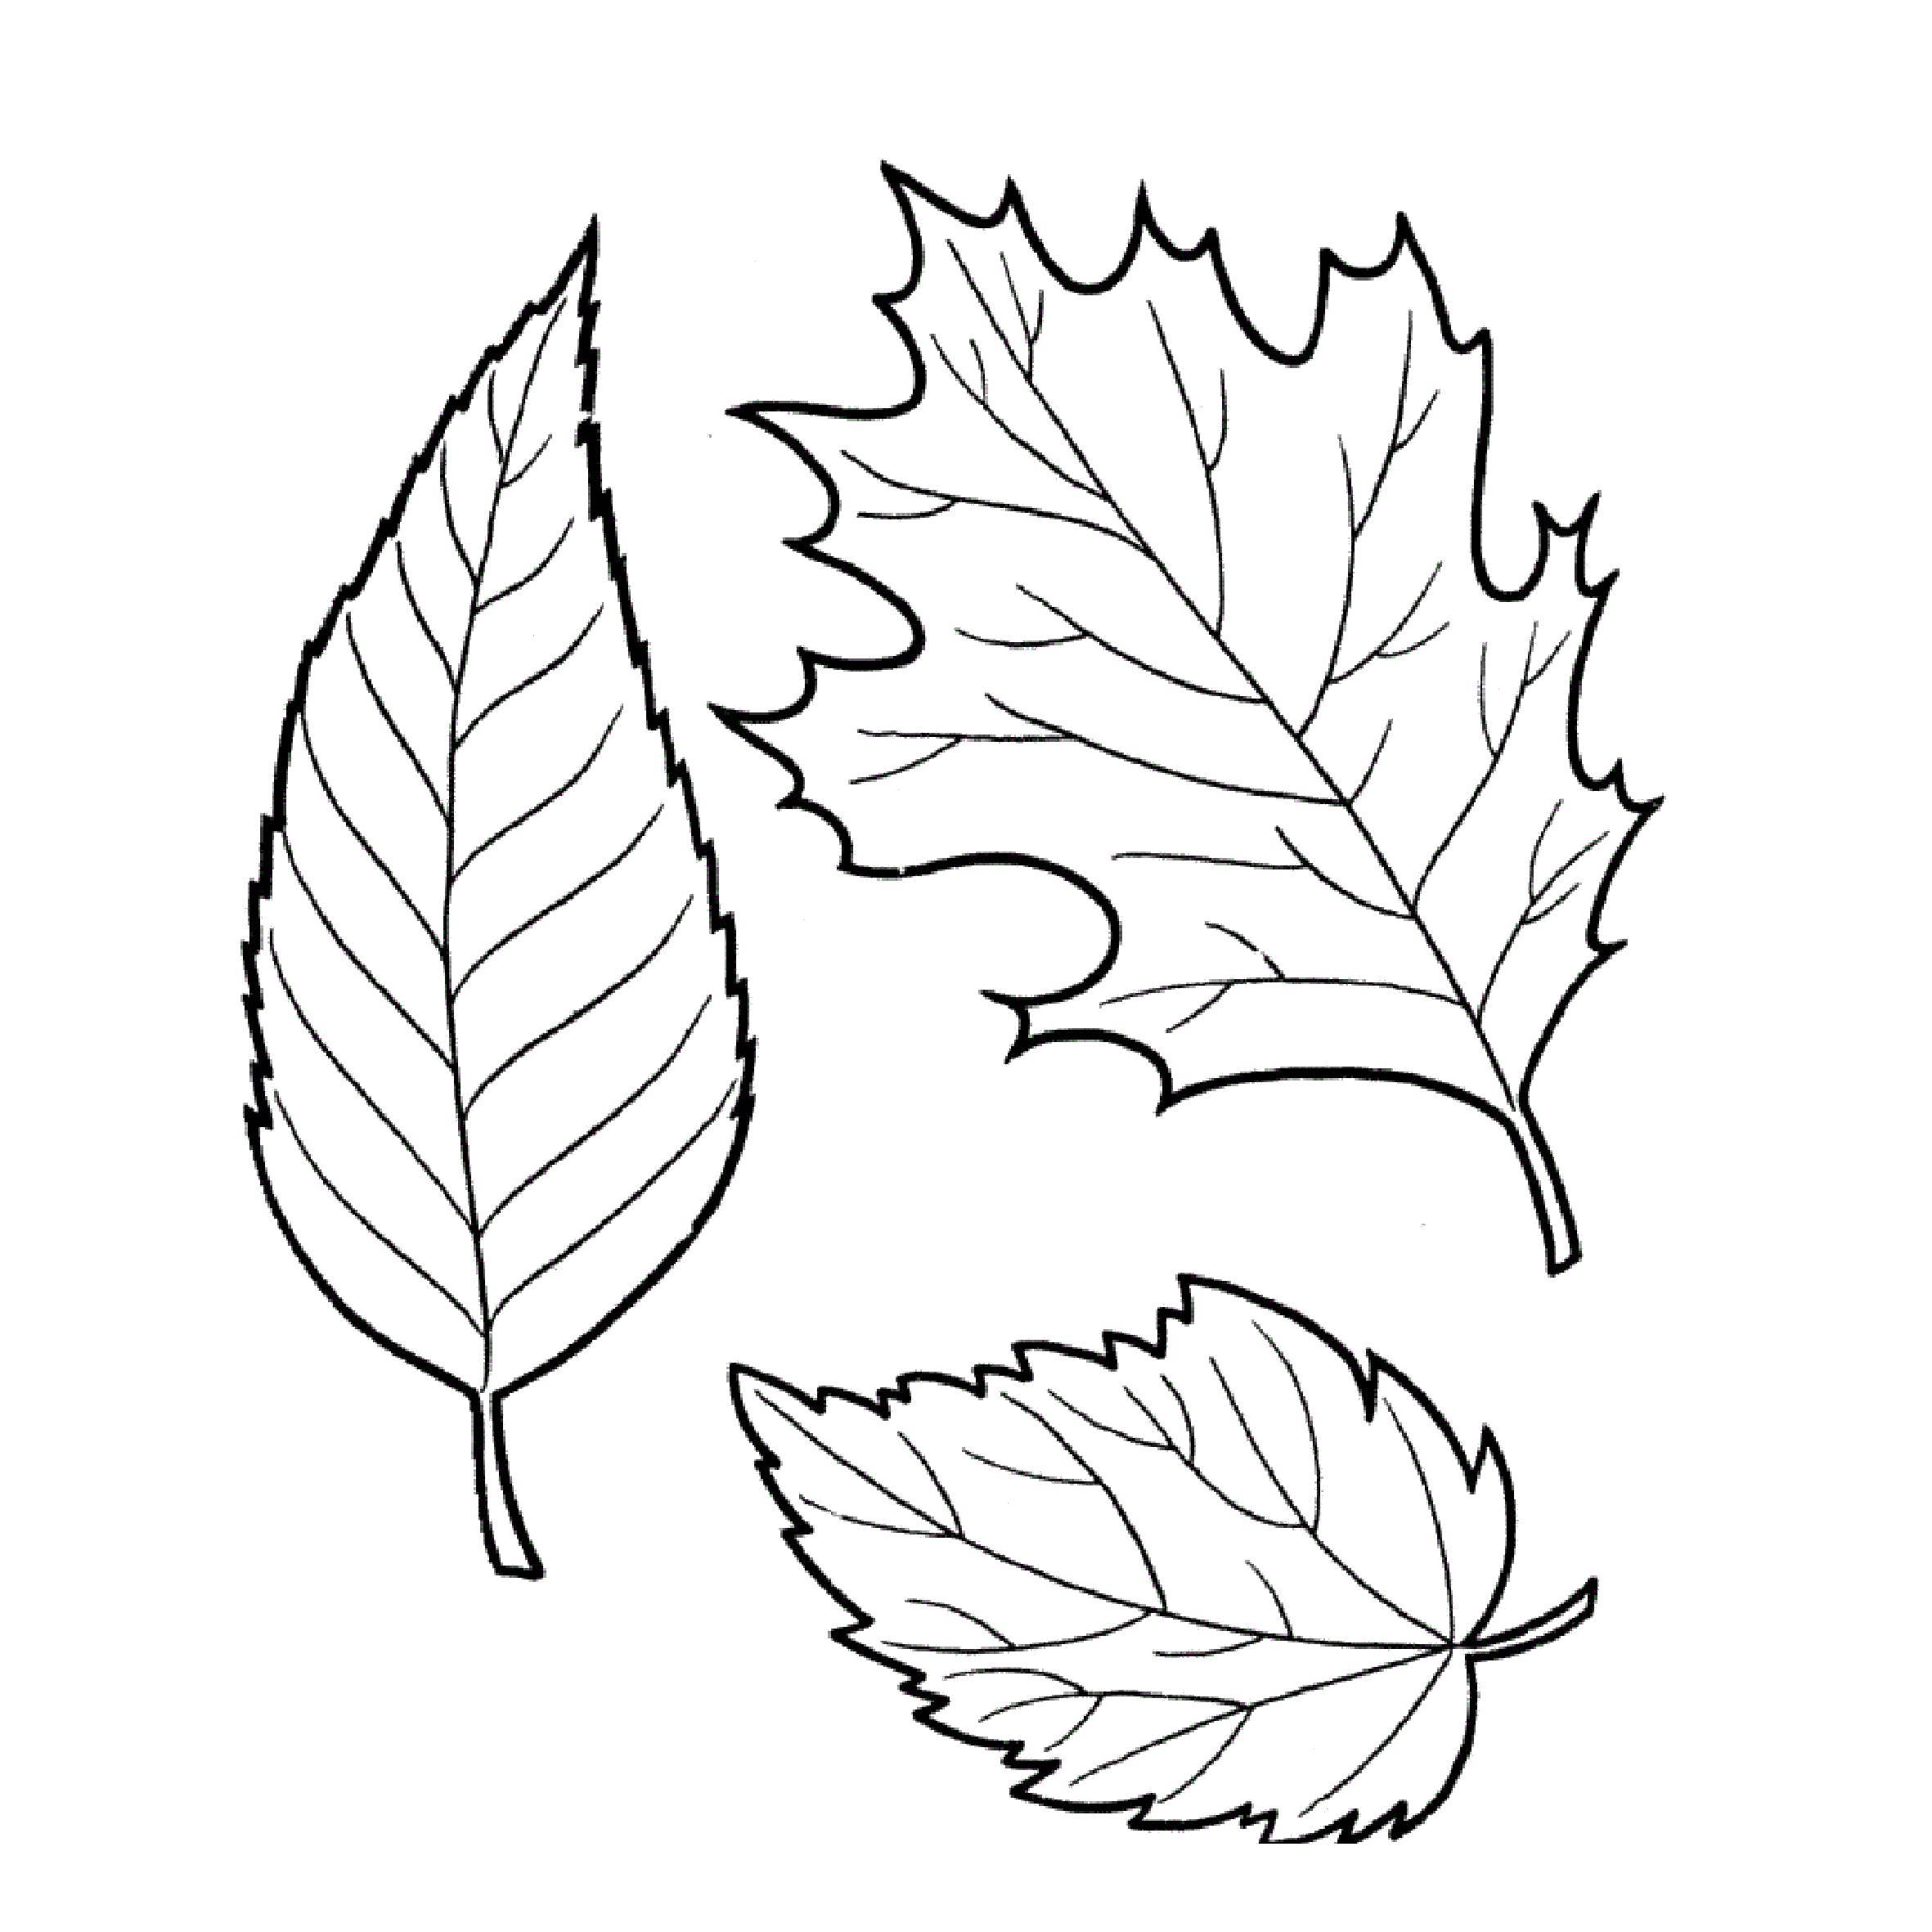 Coloring Leaves from various trees. Category leaves. Tags:  Trees, leaf.